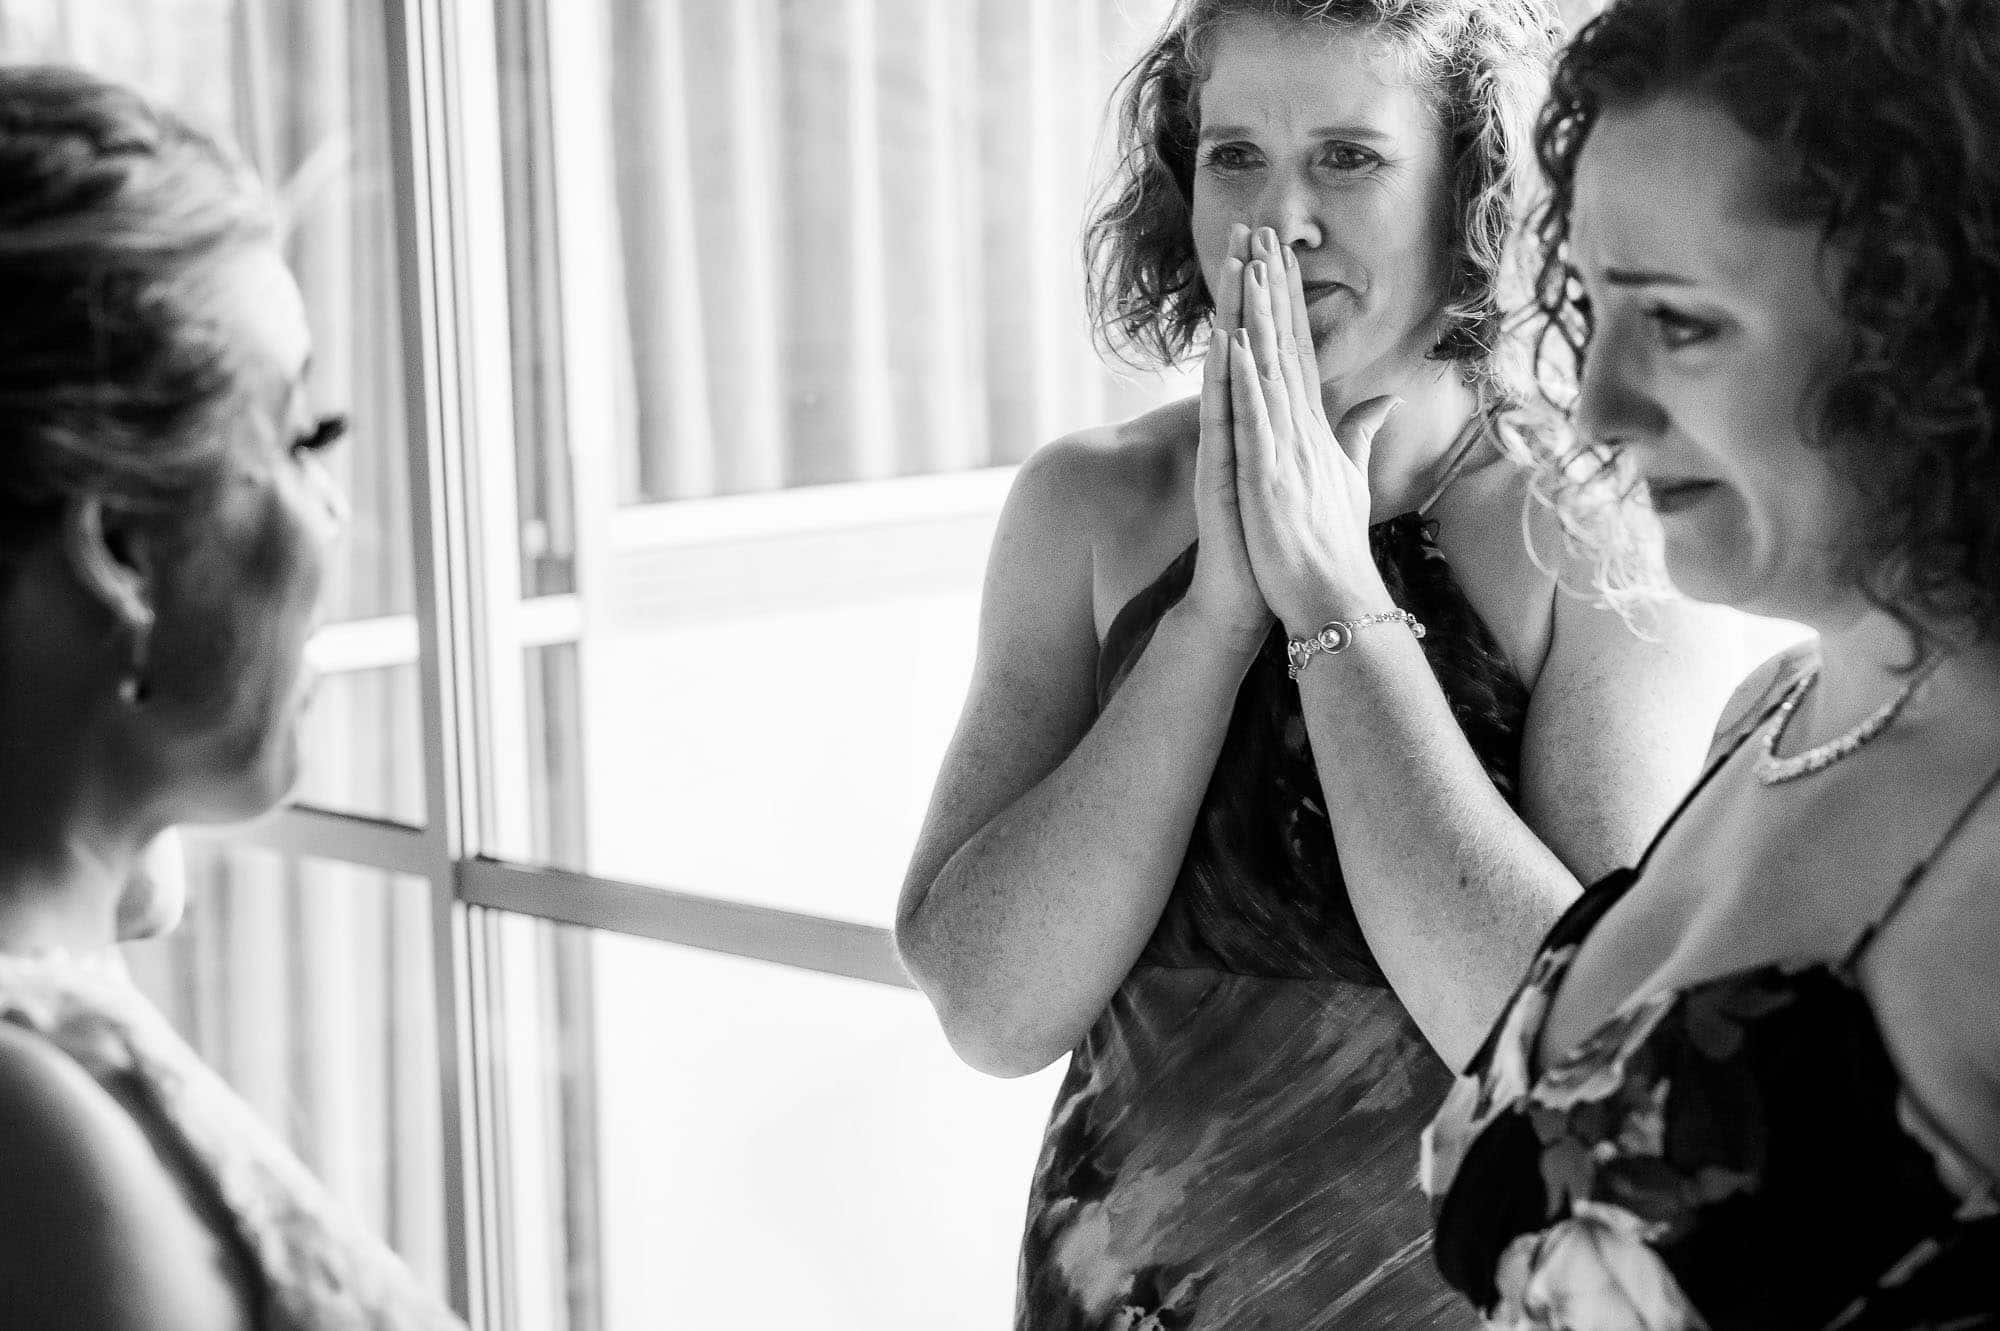 An emotional moment as the bride's friends view her with tears in their eyes